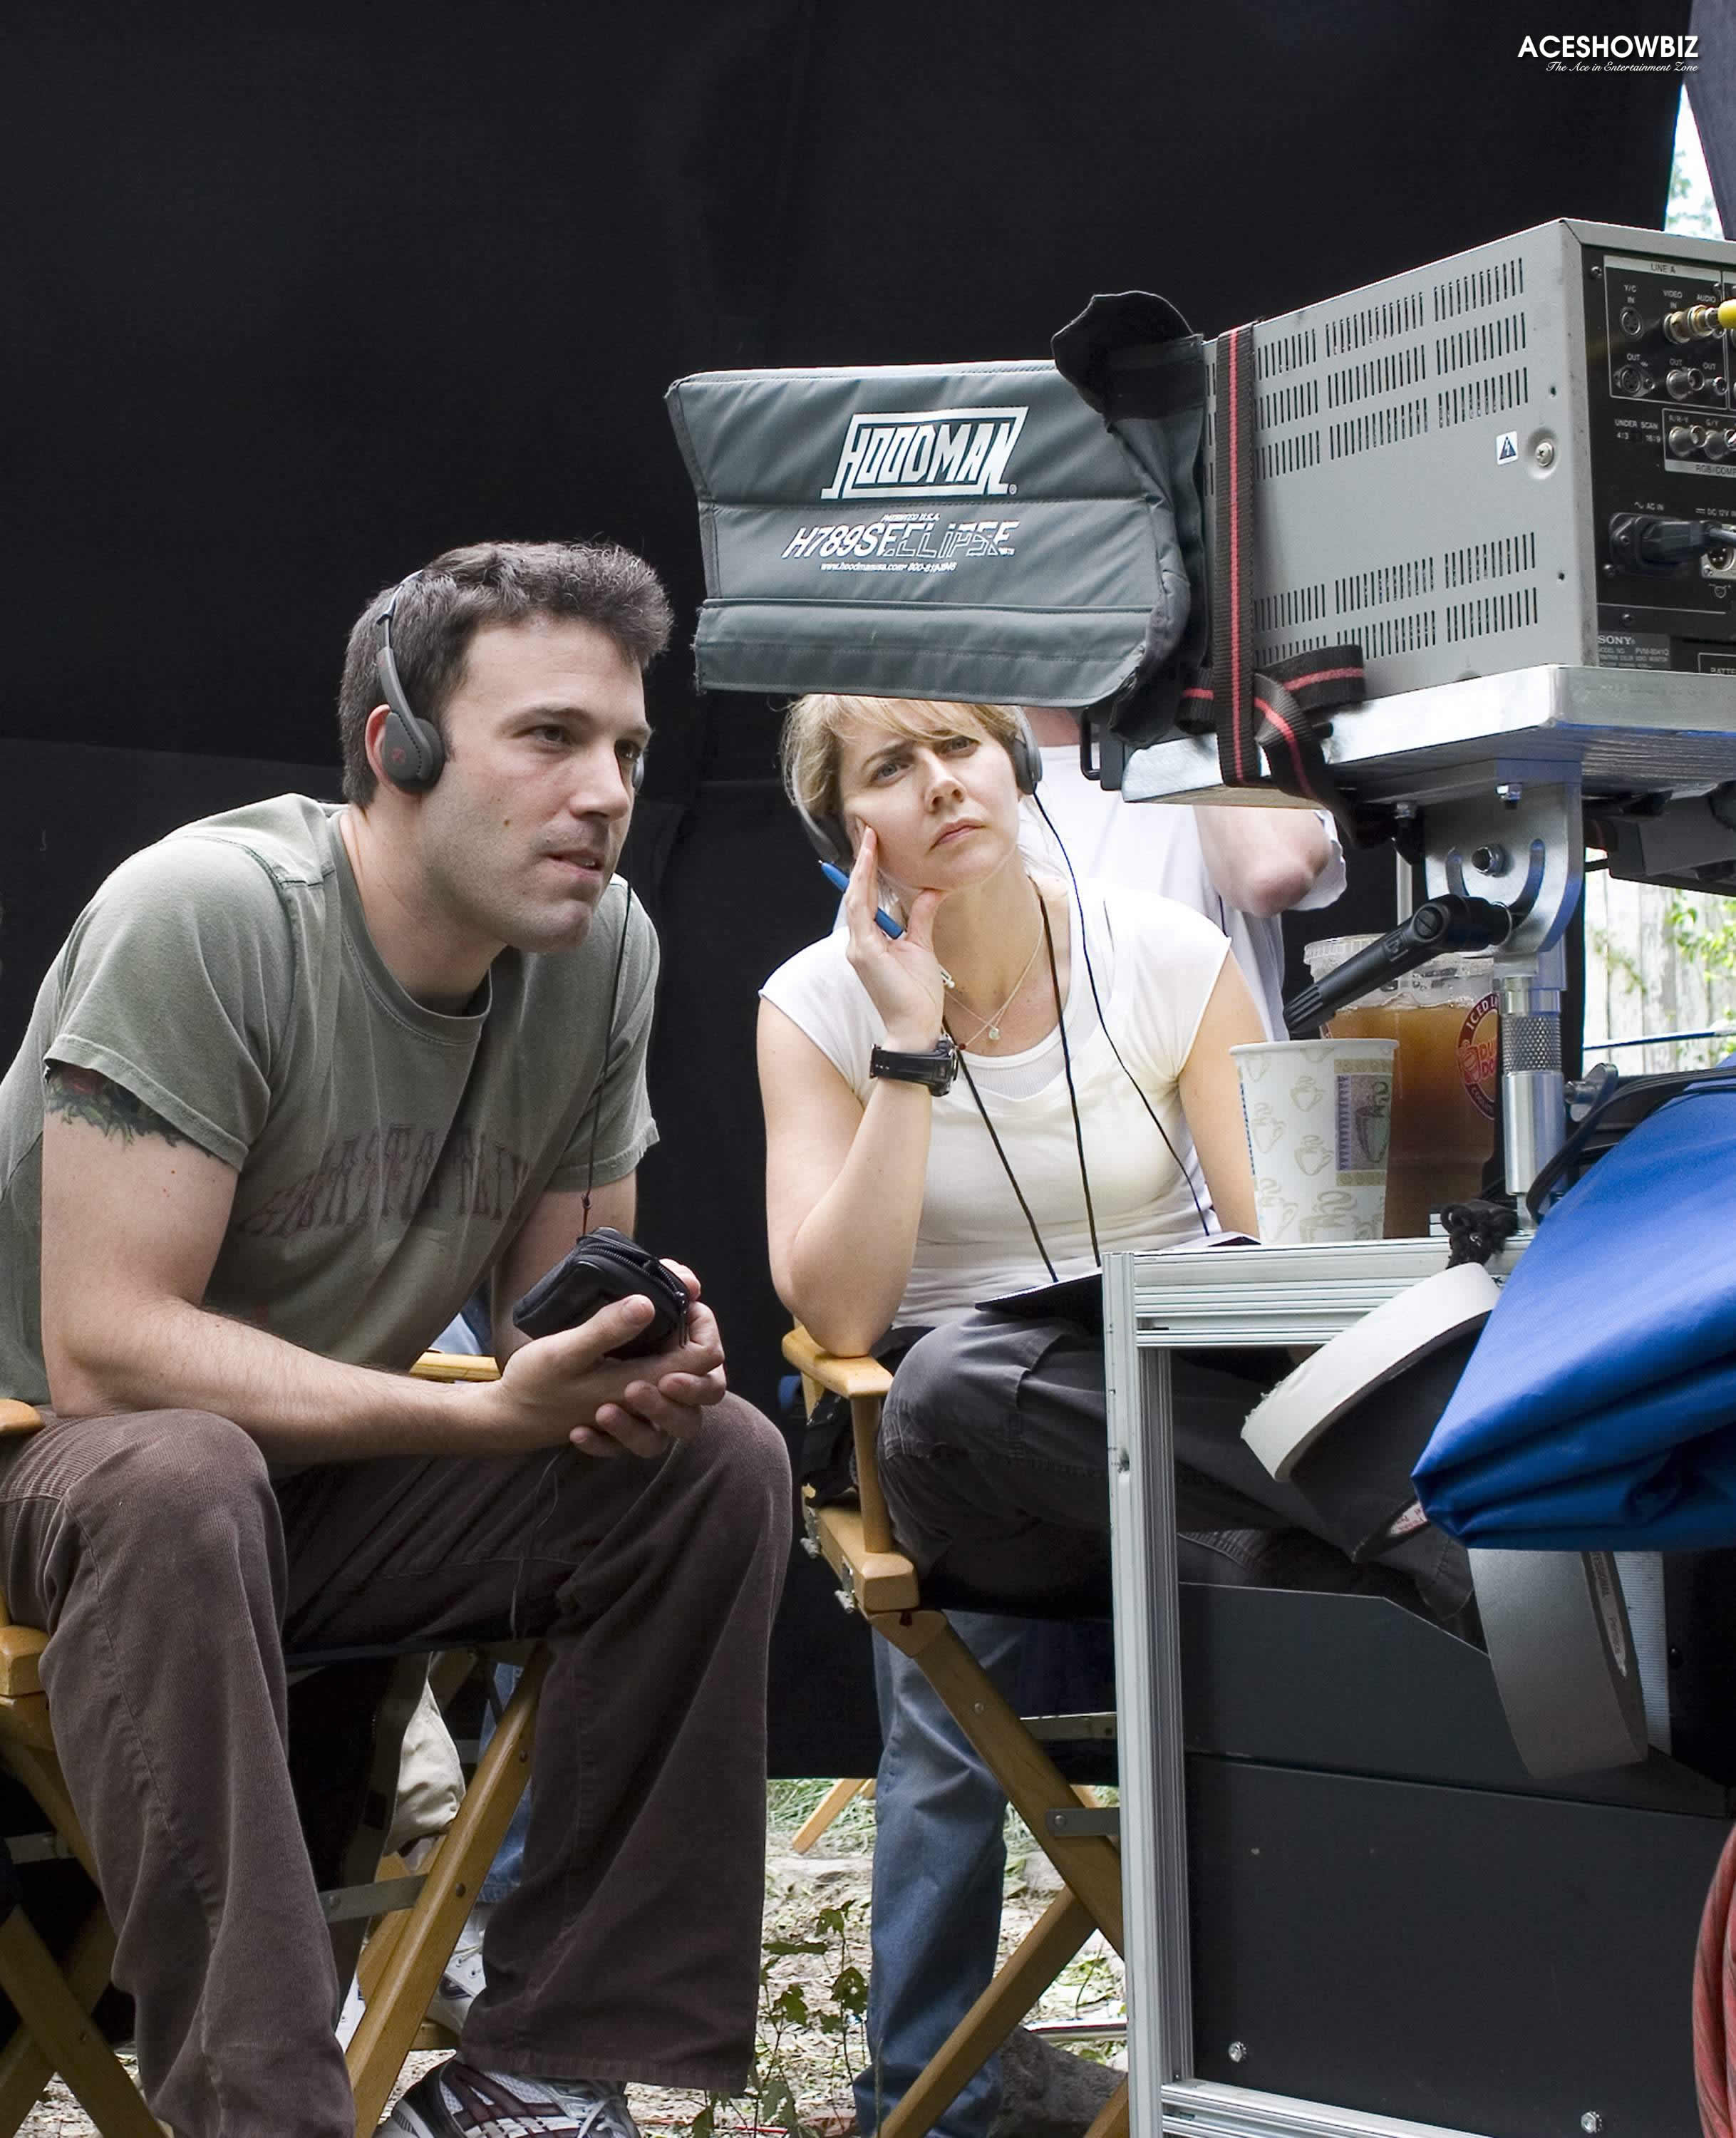 Ben Affleck as the Director of Miramax Films' Gone Baby Gone (2007)